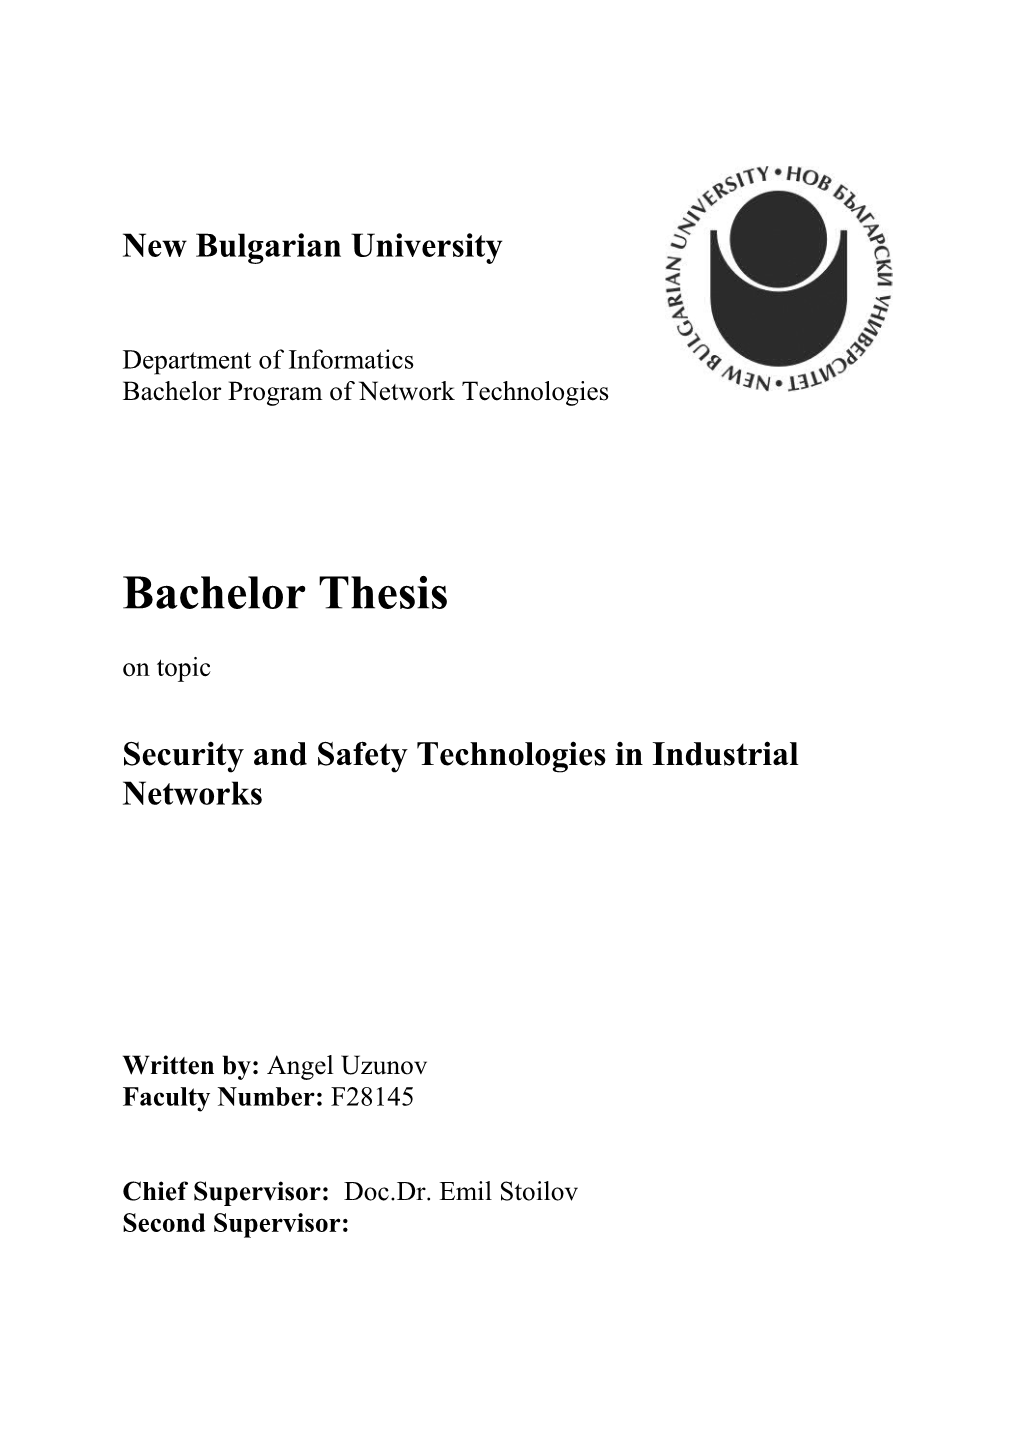 Security and Safety Technologies in Industrial Networks